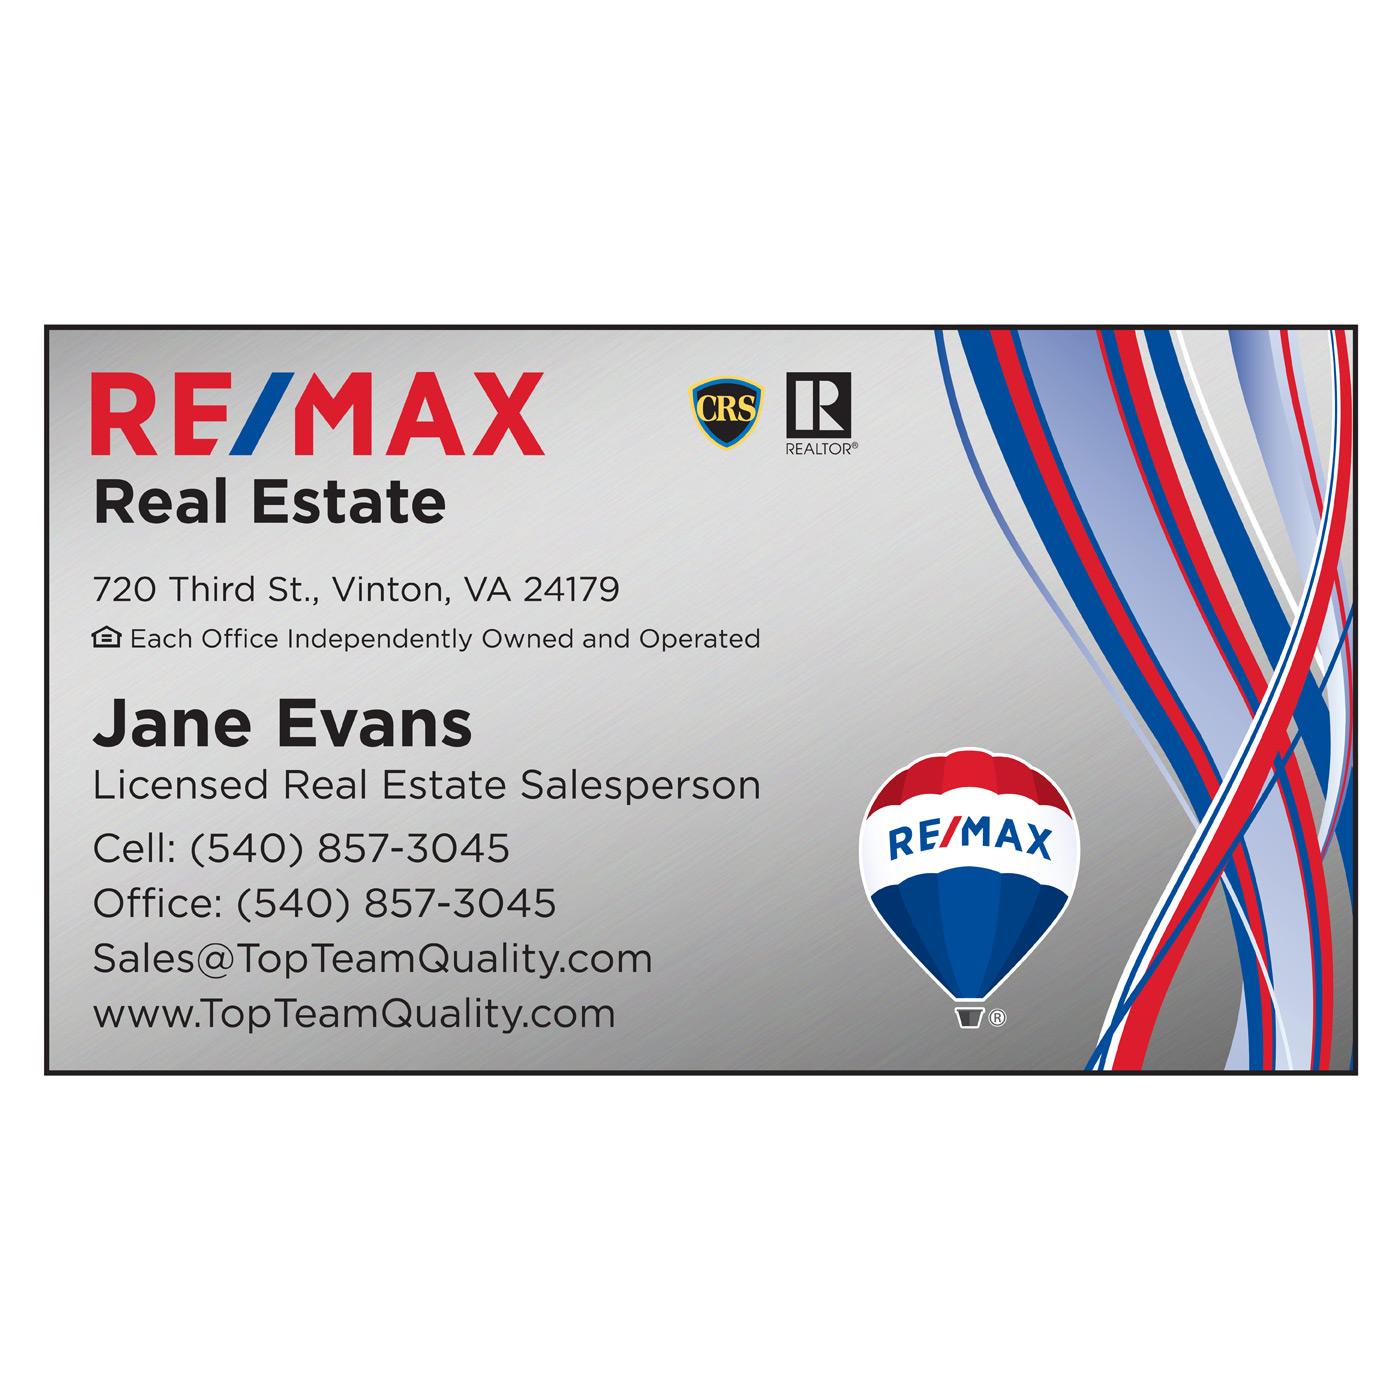 RE/MAX standard business card